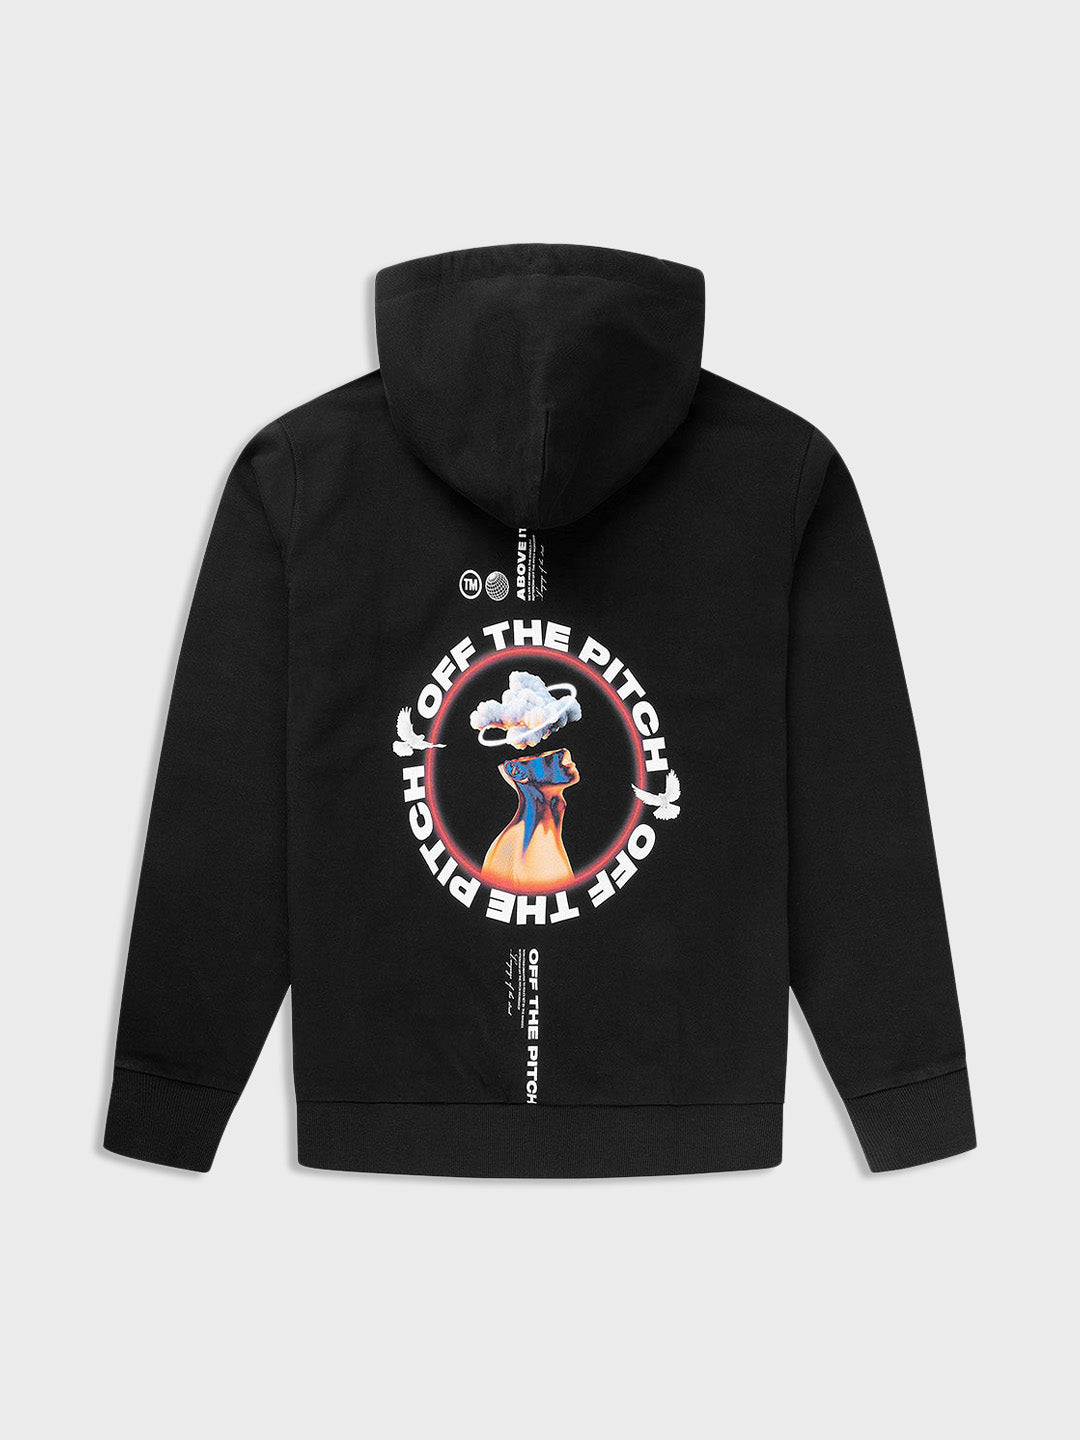 off the pitch hoodie